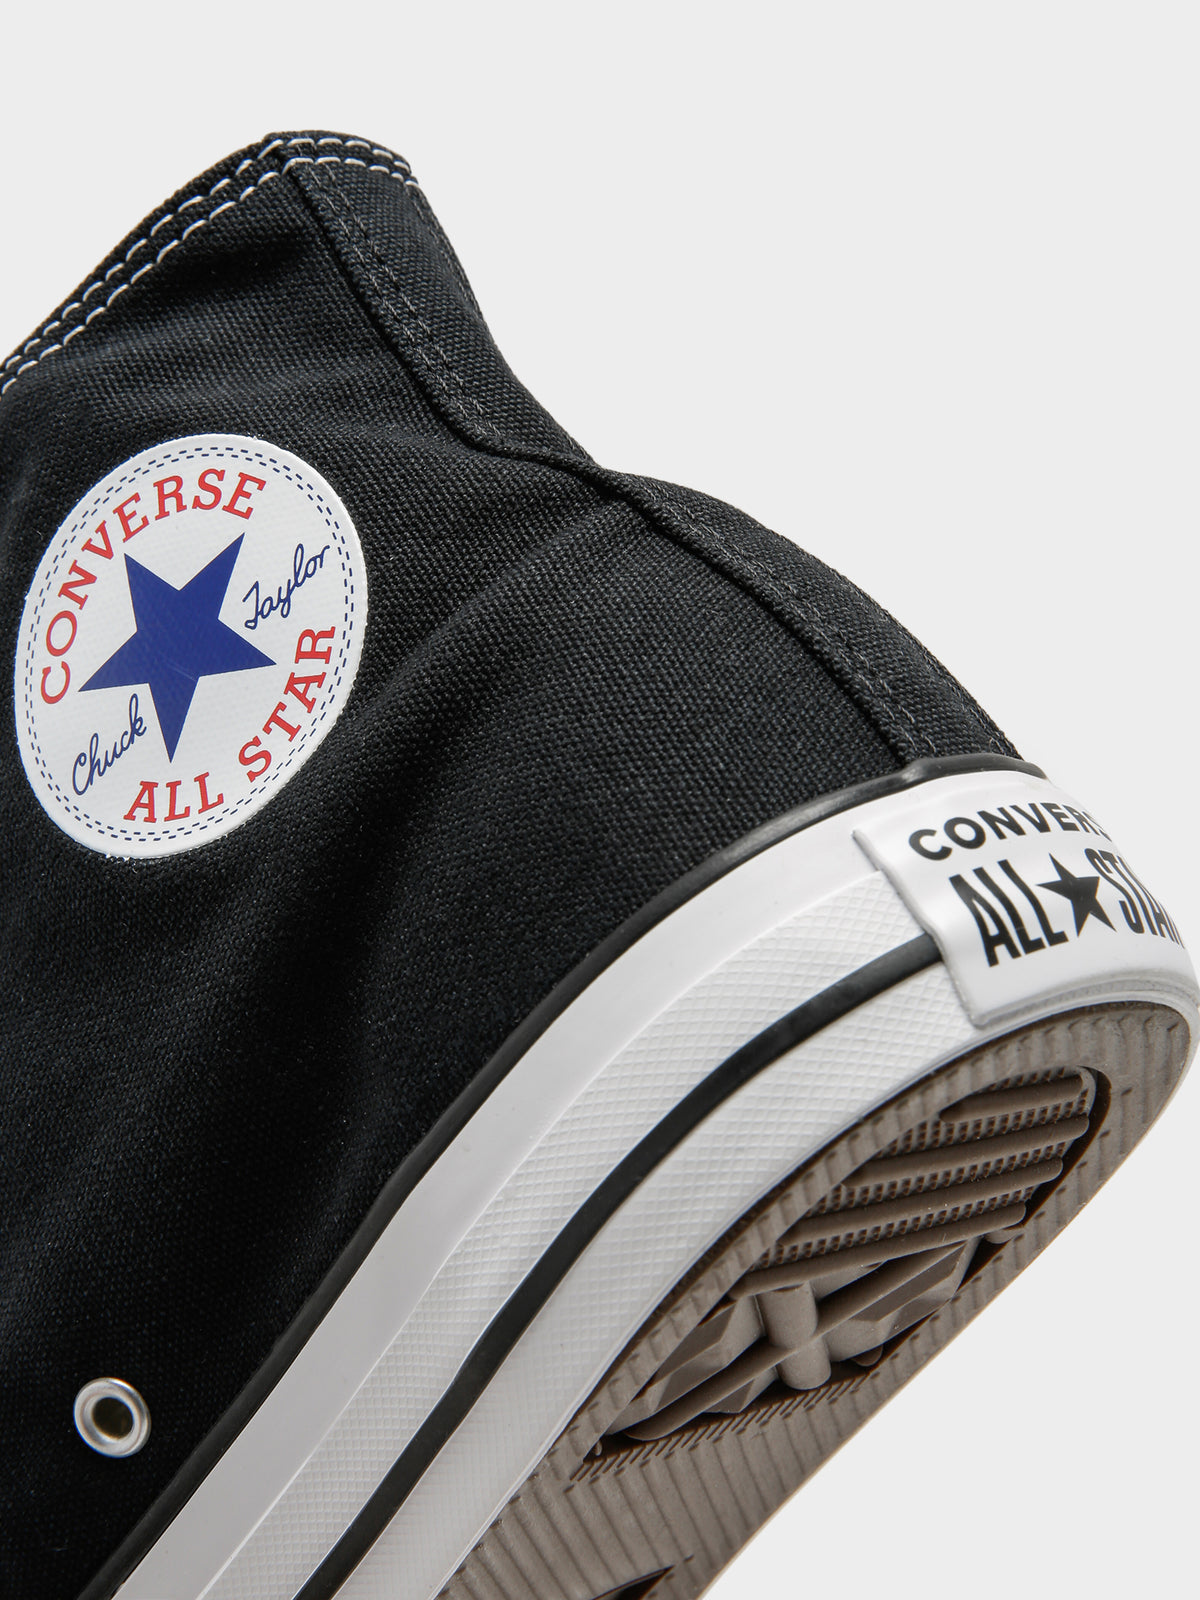 Unisex Chuck Taylor All Star High Top Sneakers in Black